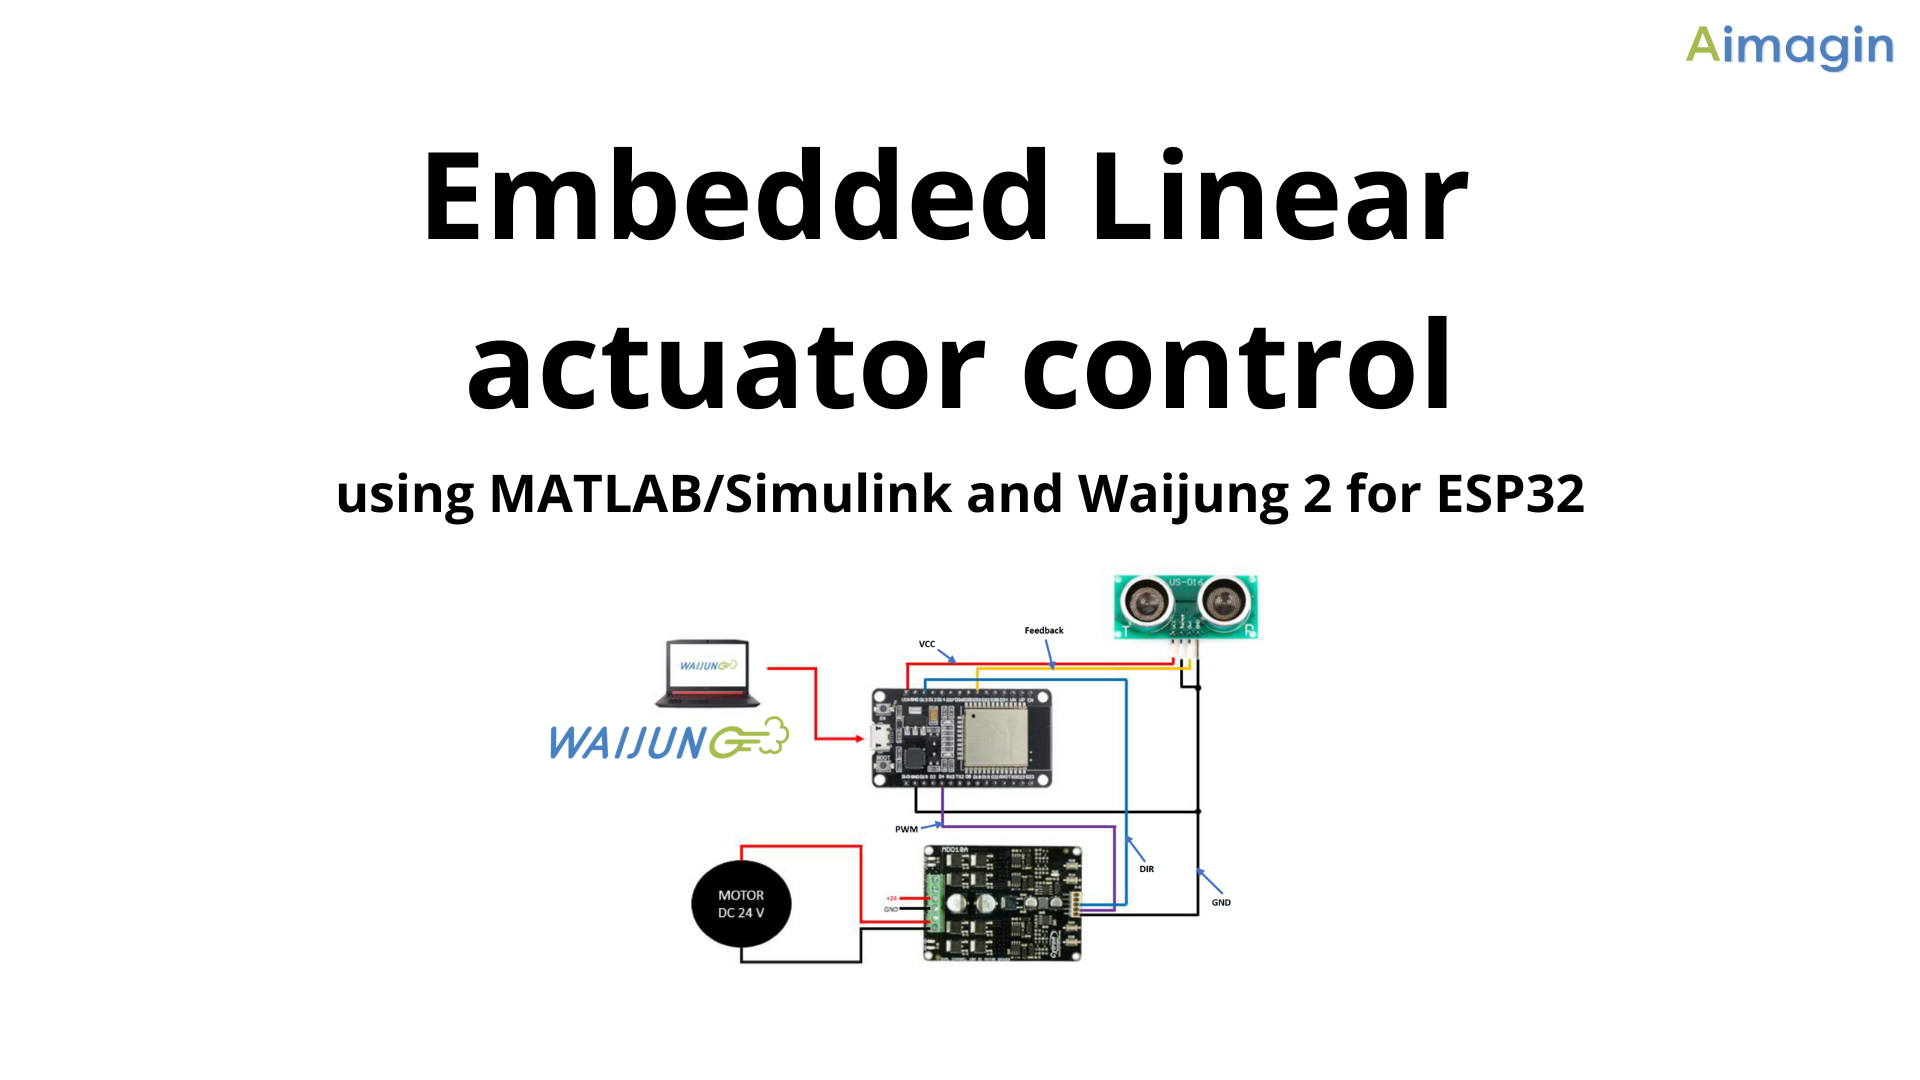 Embedded Linear actuator control using MATLAB/Simulink and Waijung 2 for ESP32